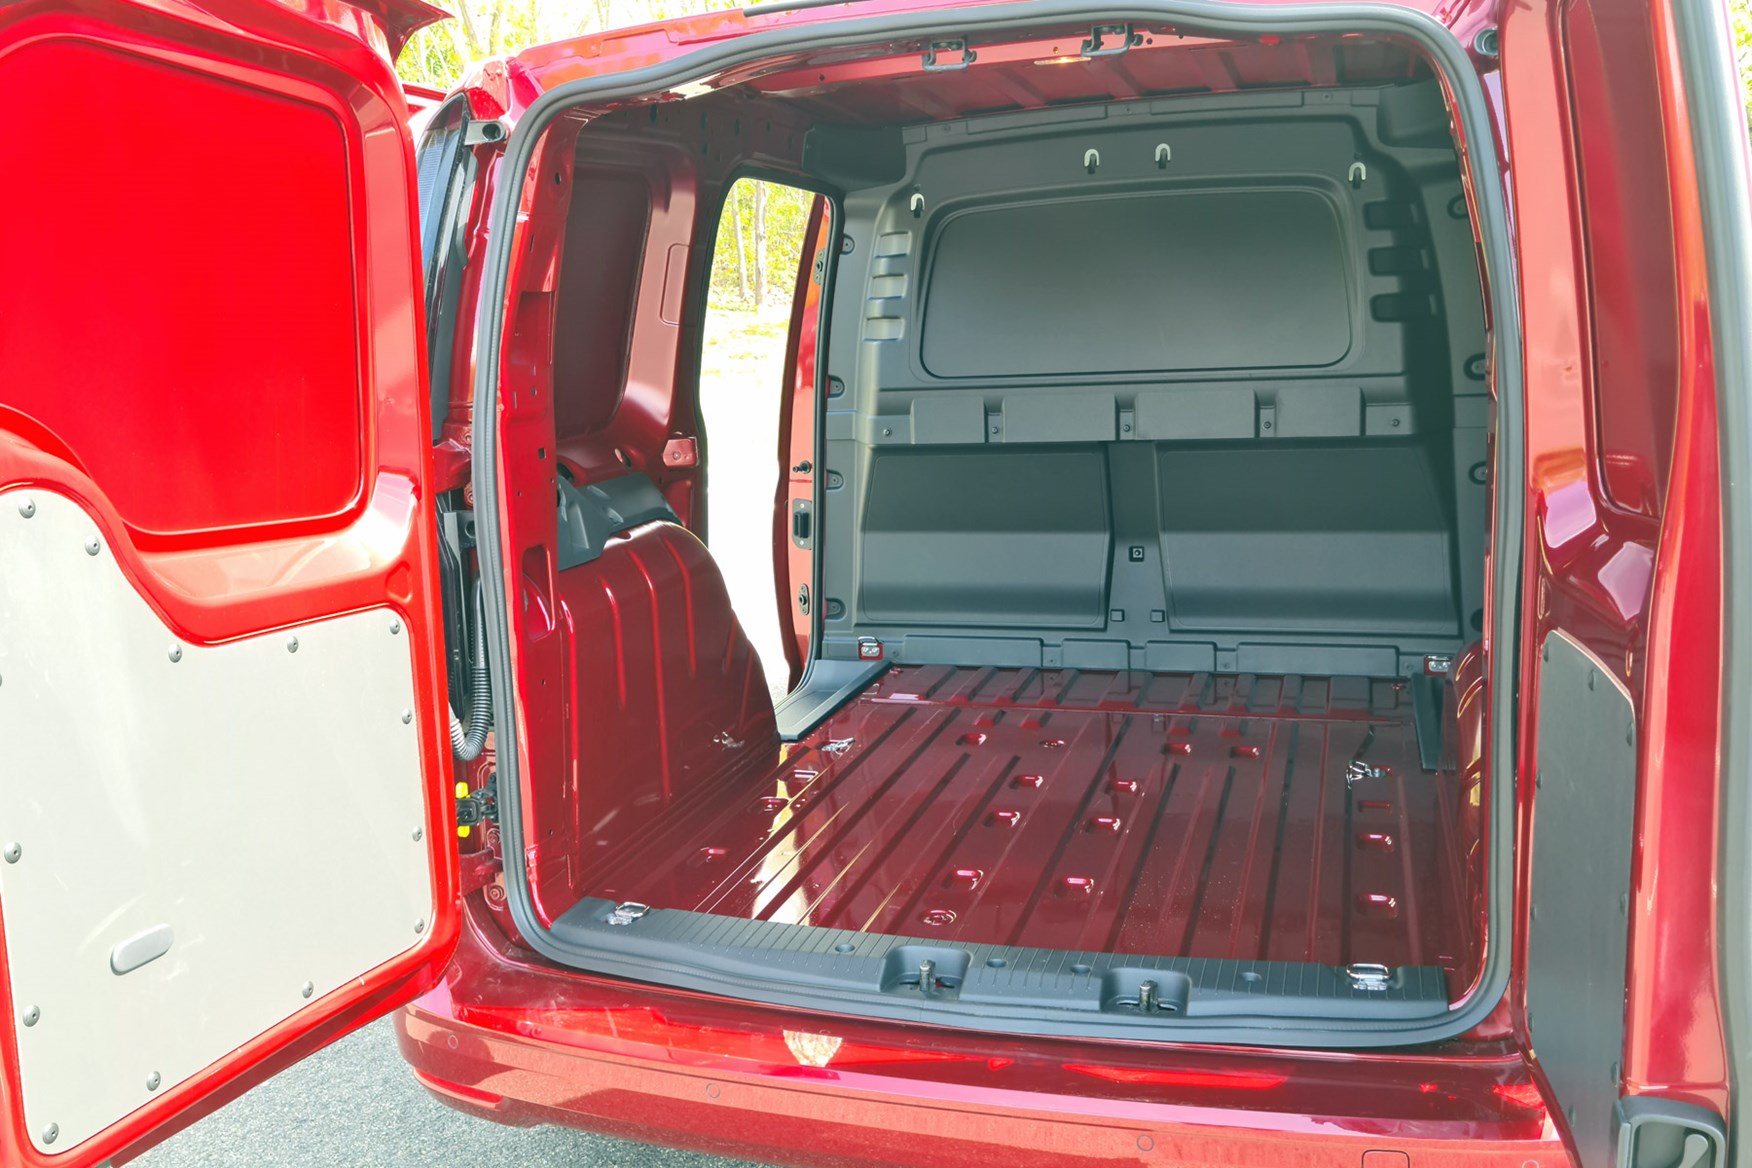 Volkswagen Caddy Cargo 1.5 TSI petrol review - load area